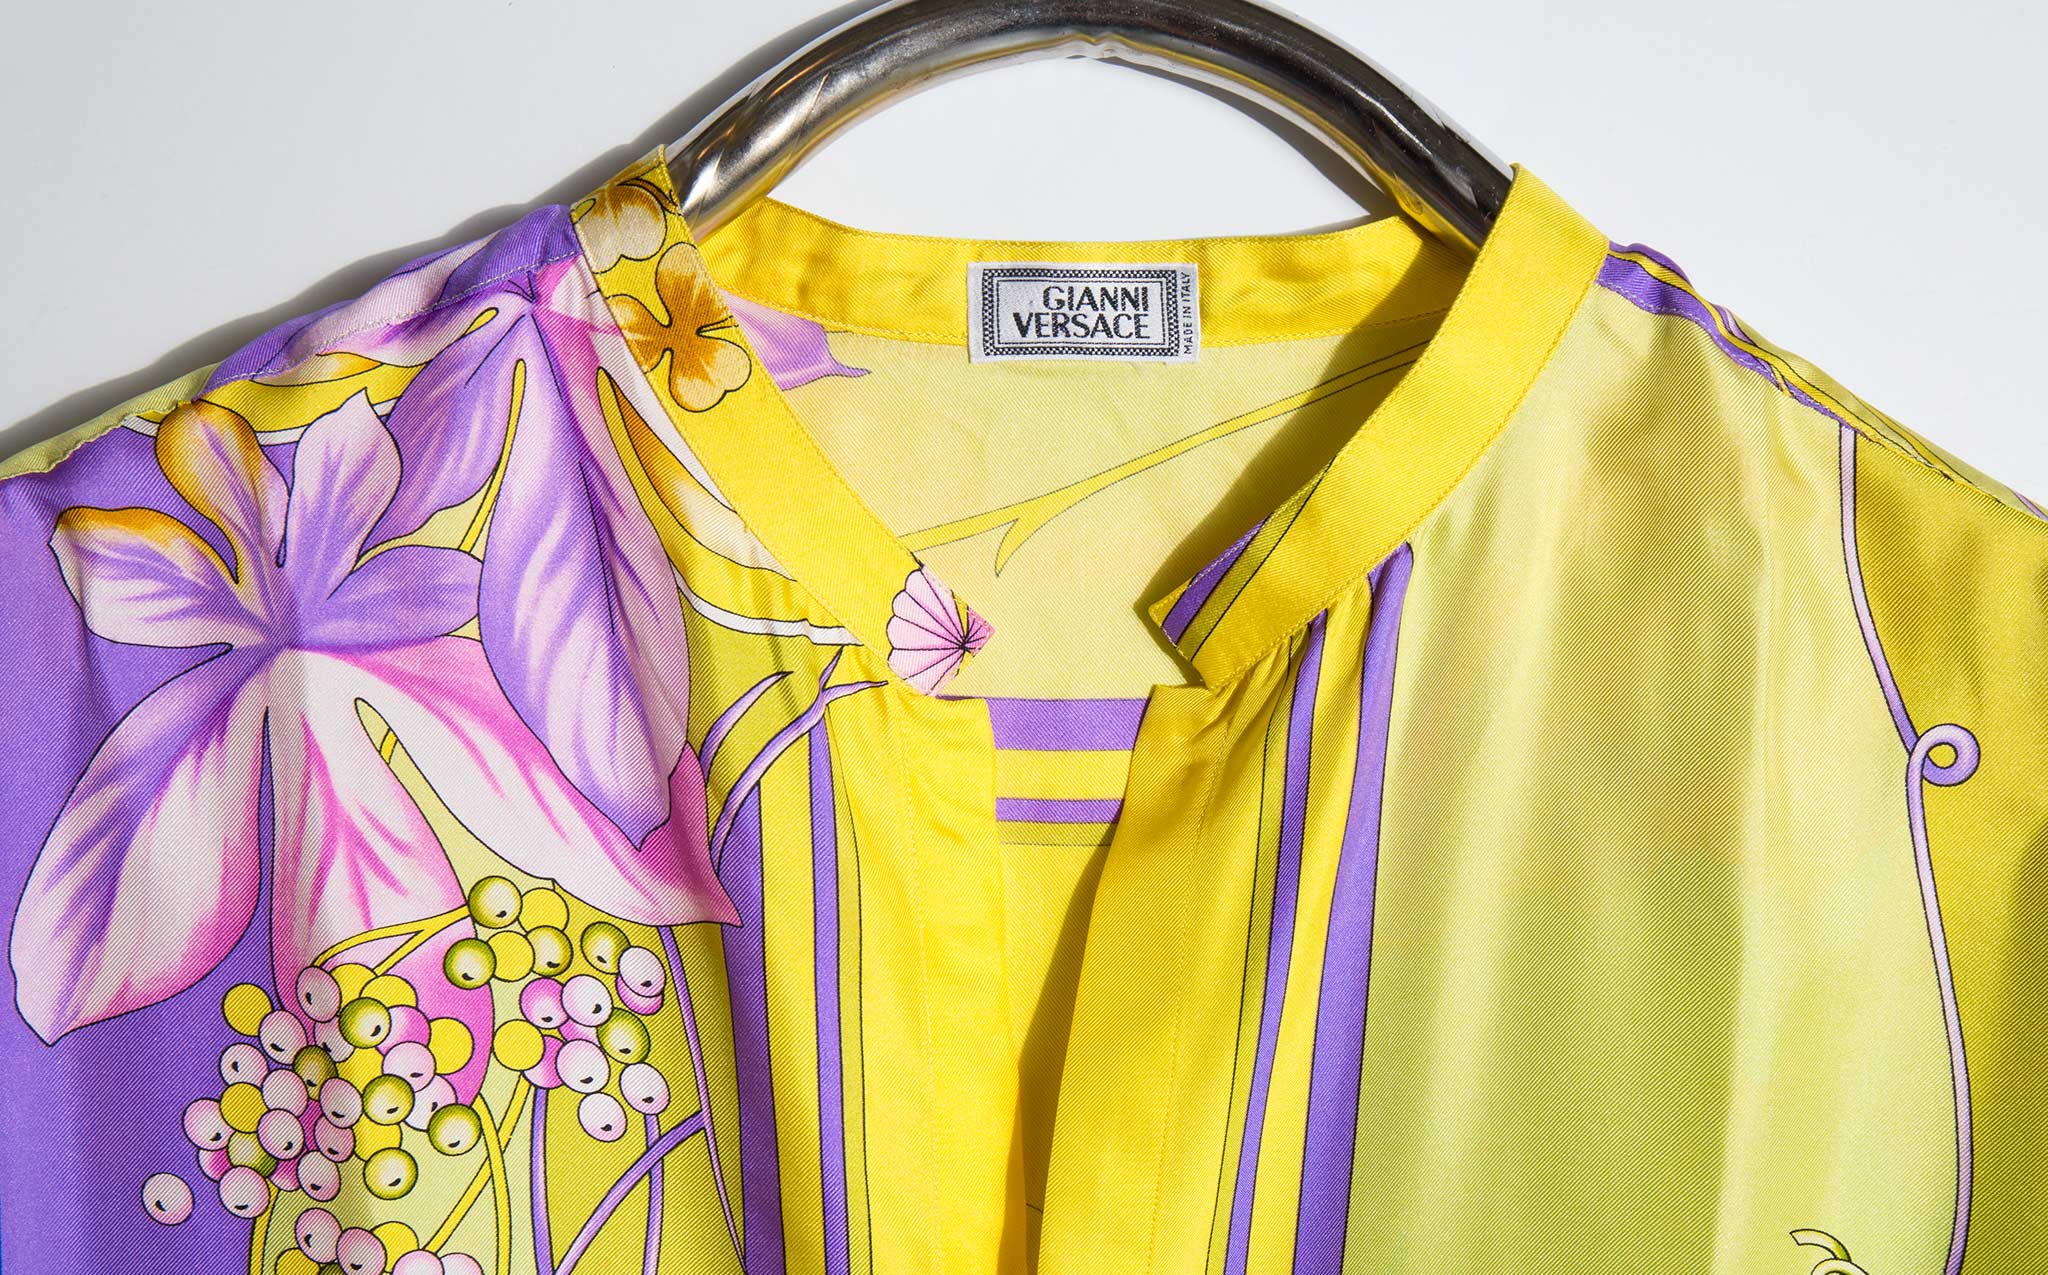 Gianni Versace Iconic 1990's Silk Floral Print Shirt